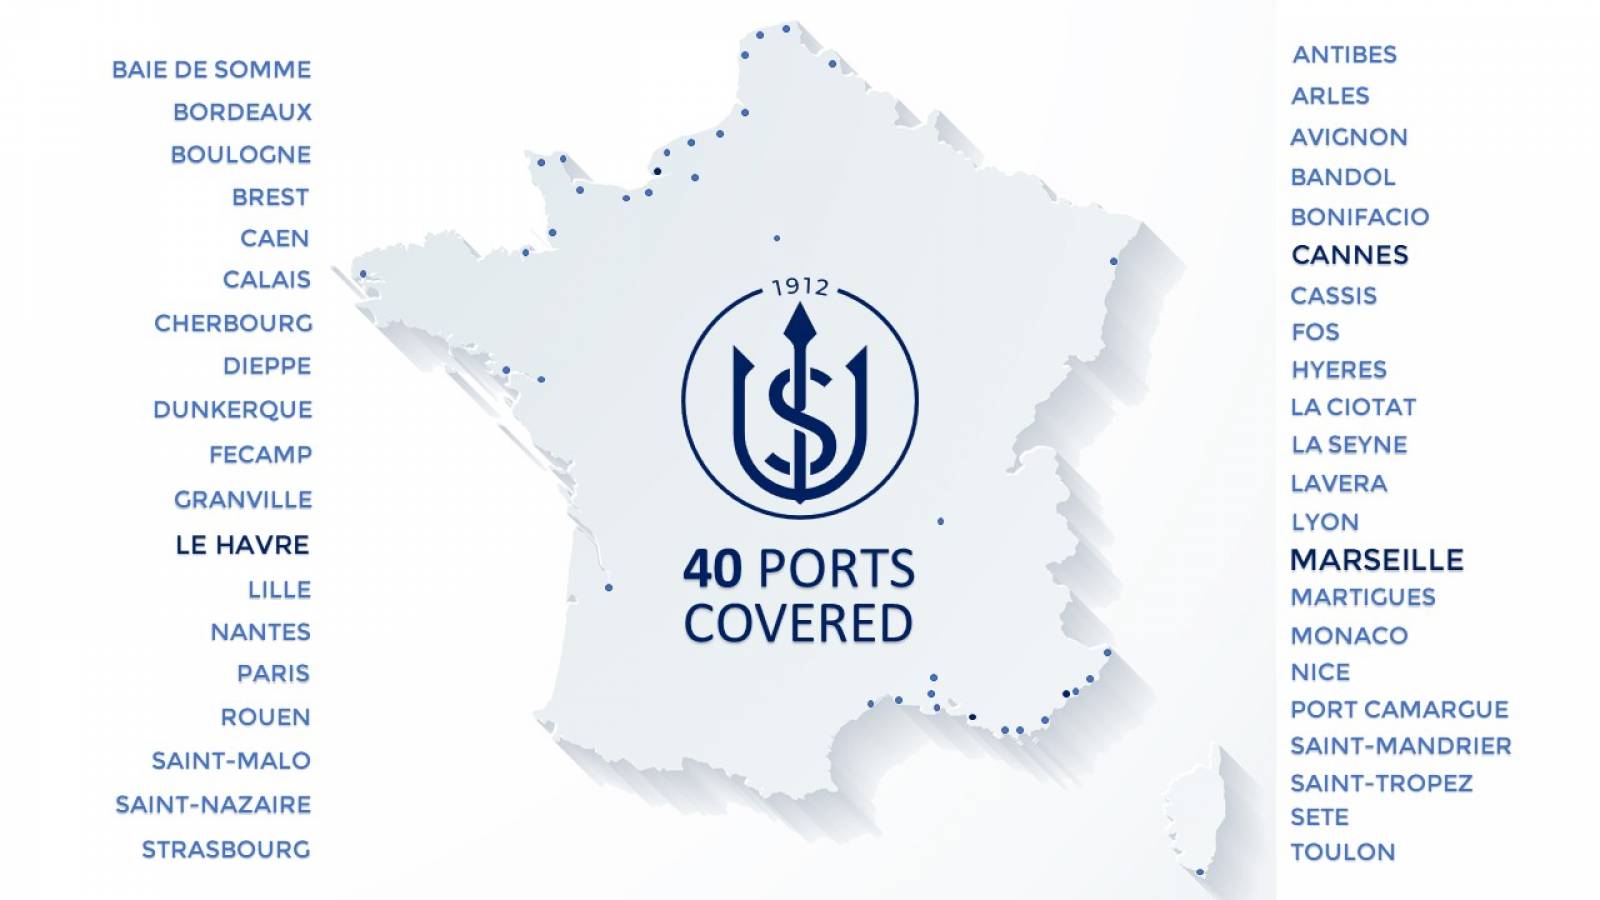 delivery and service in 40 ports